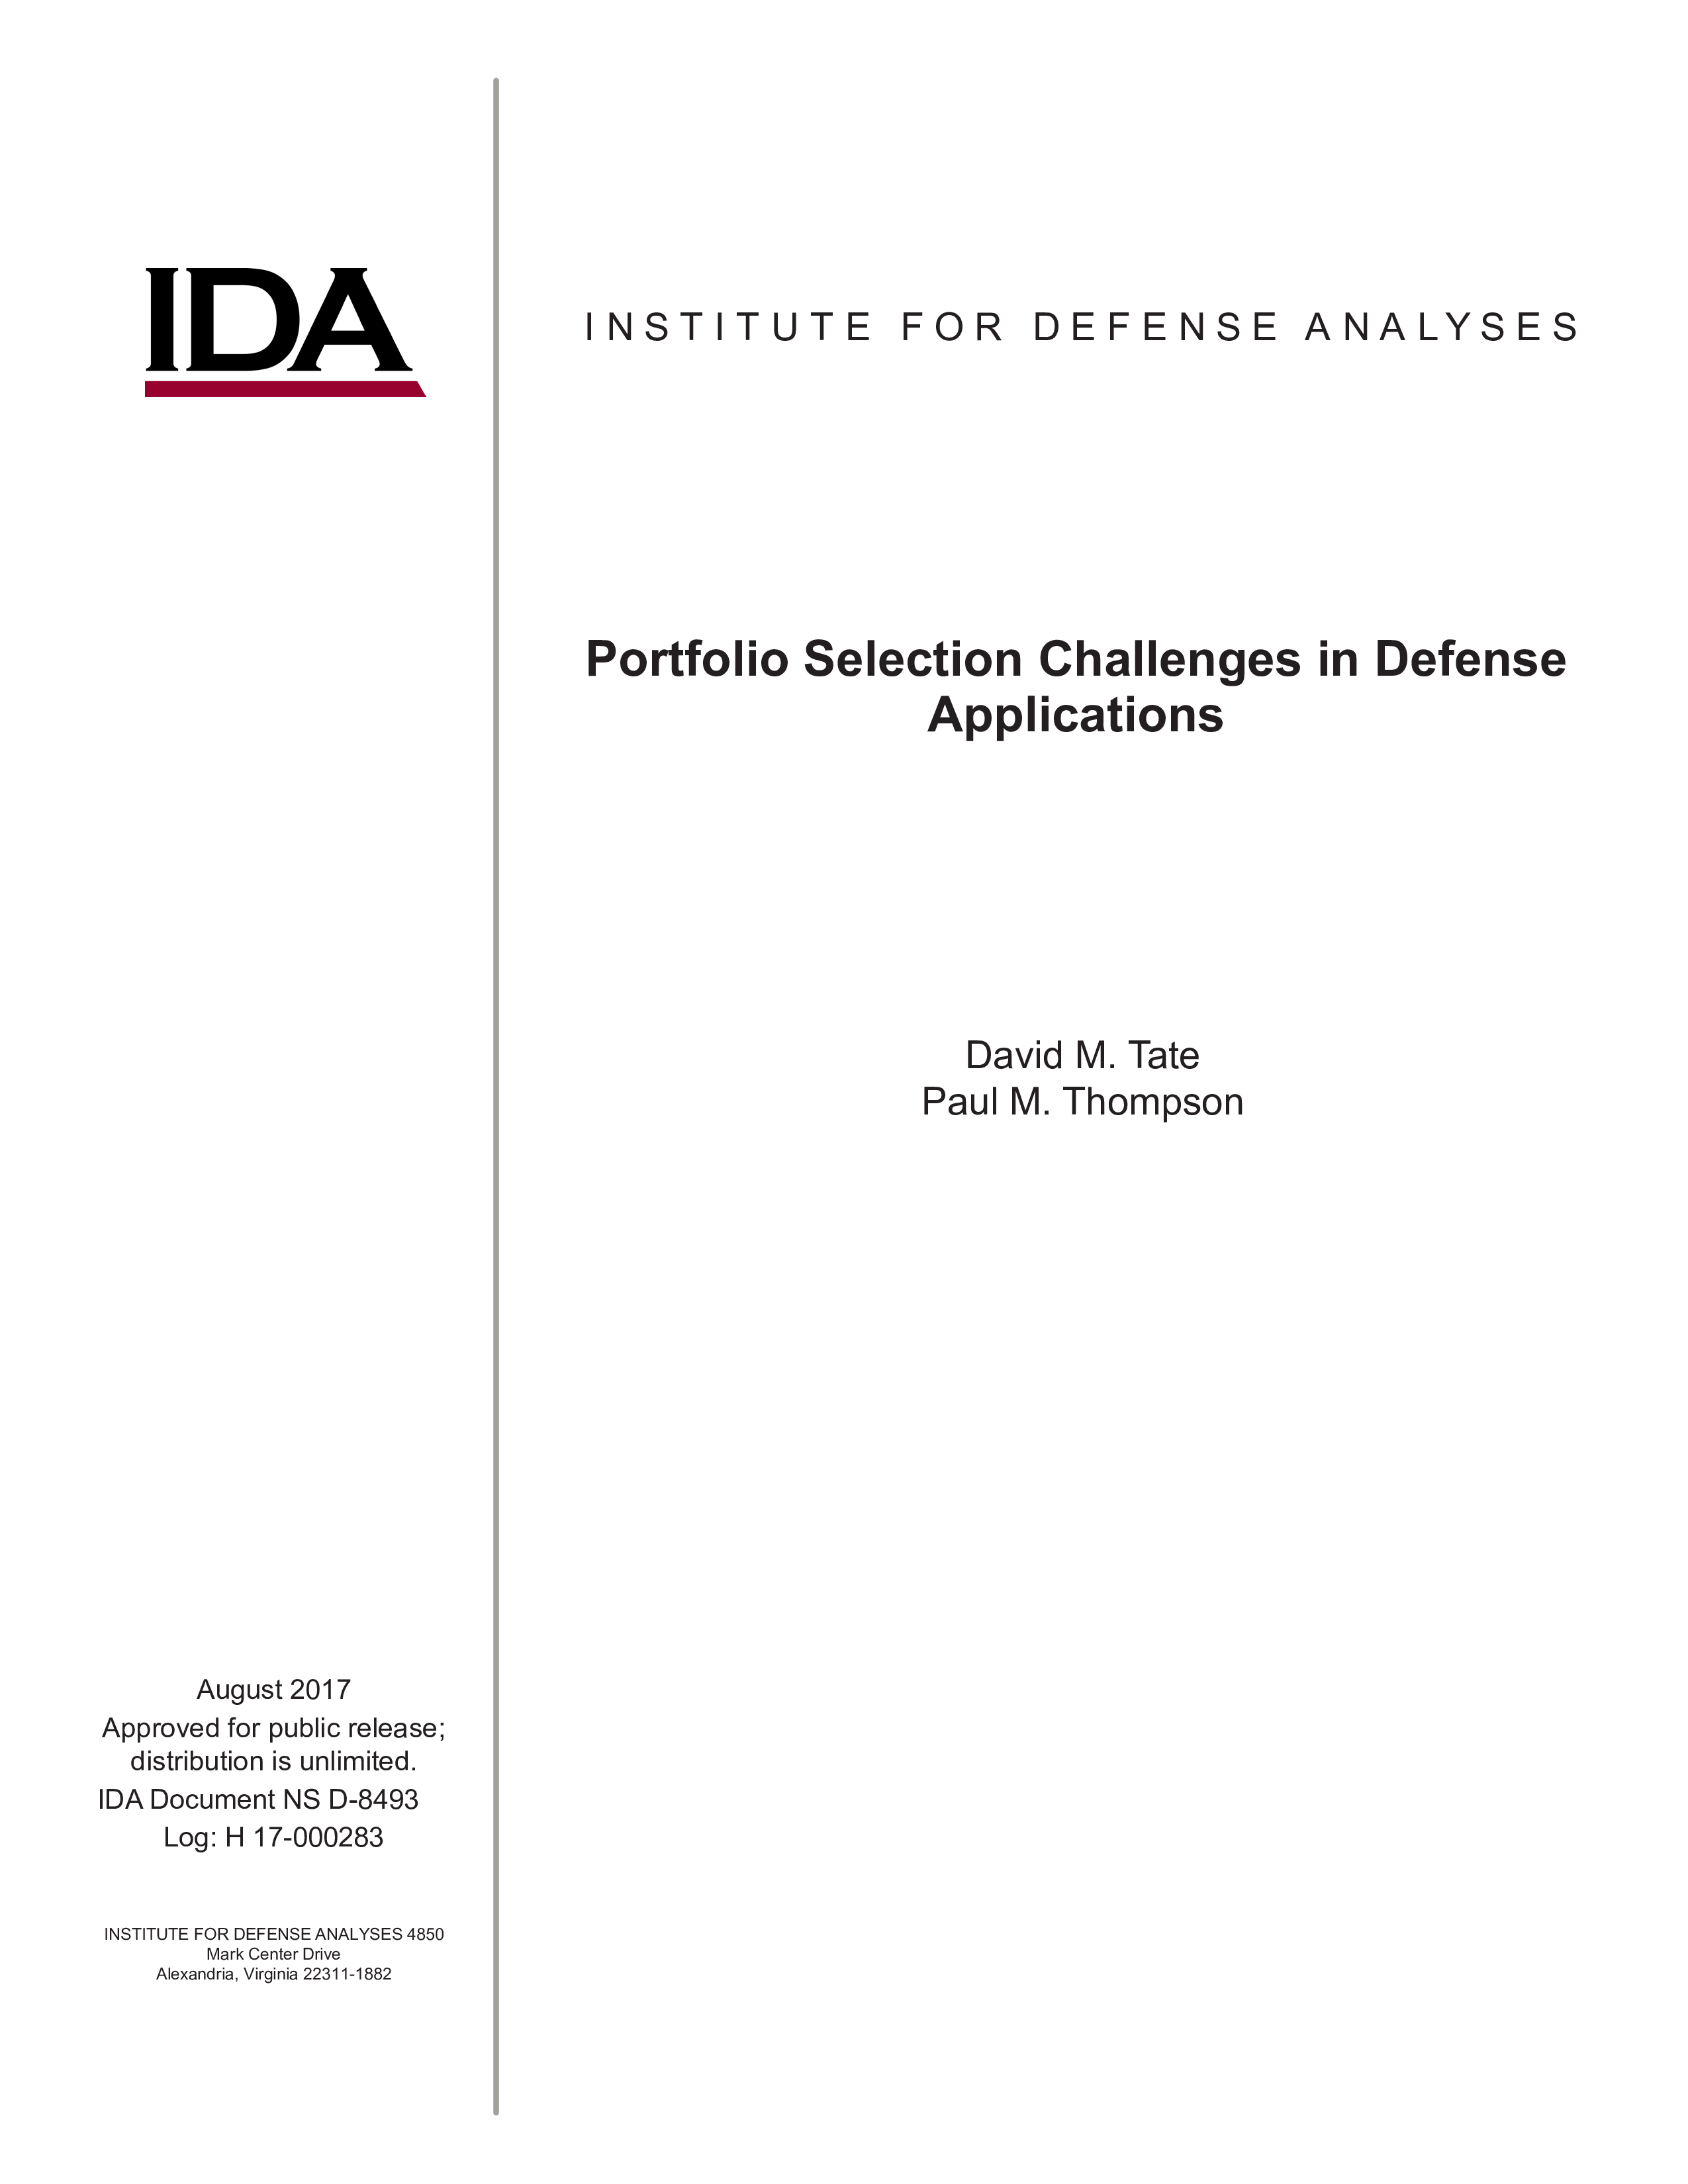 Portfolio Selection Challenges in Defense Applications